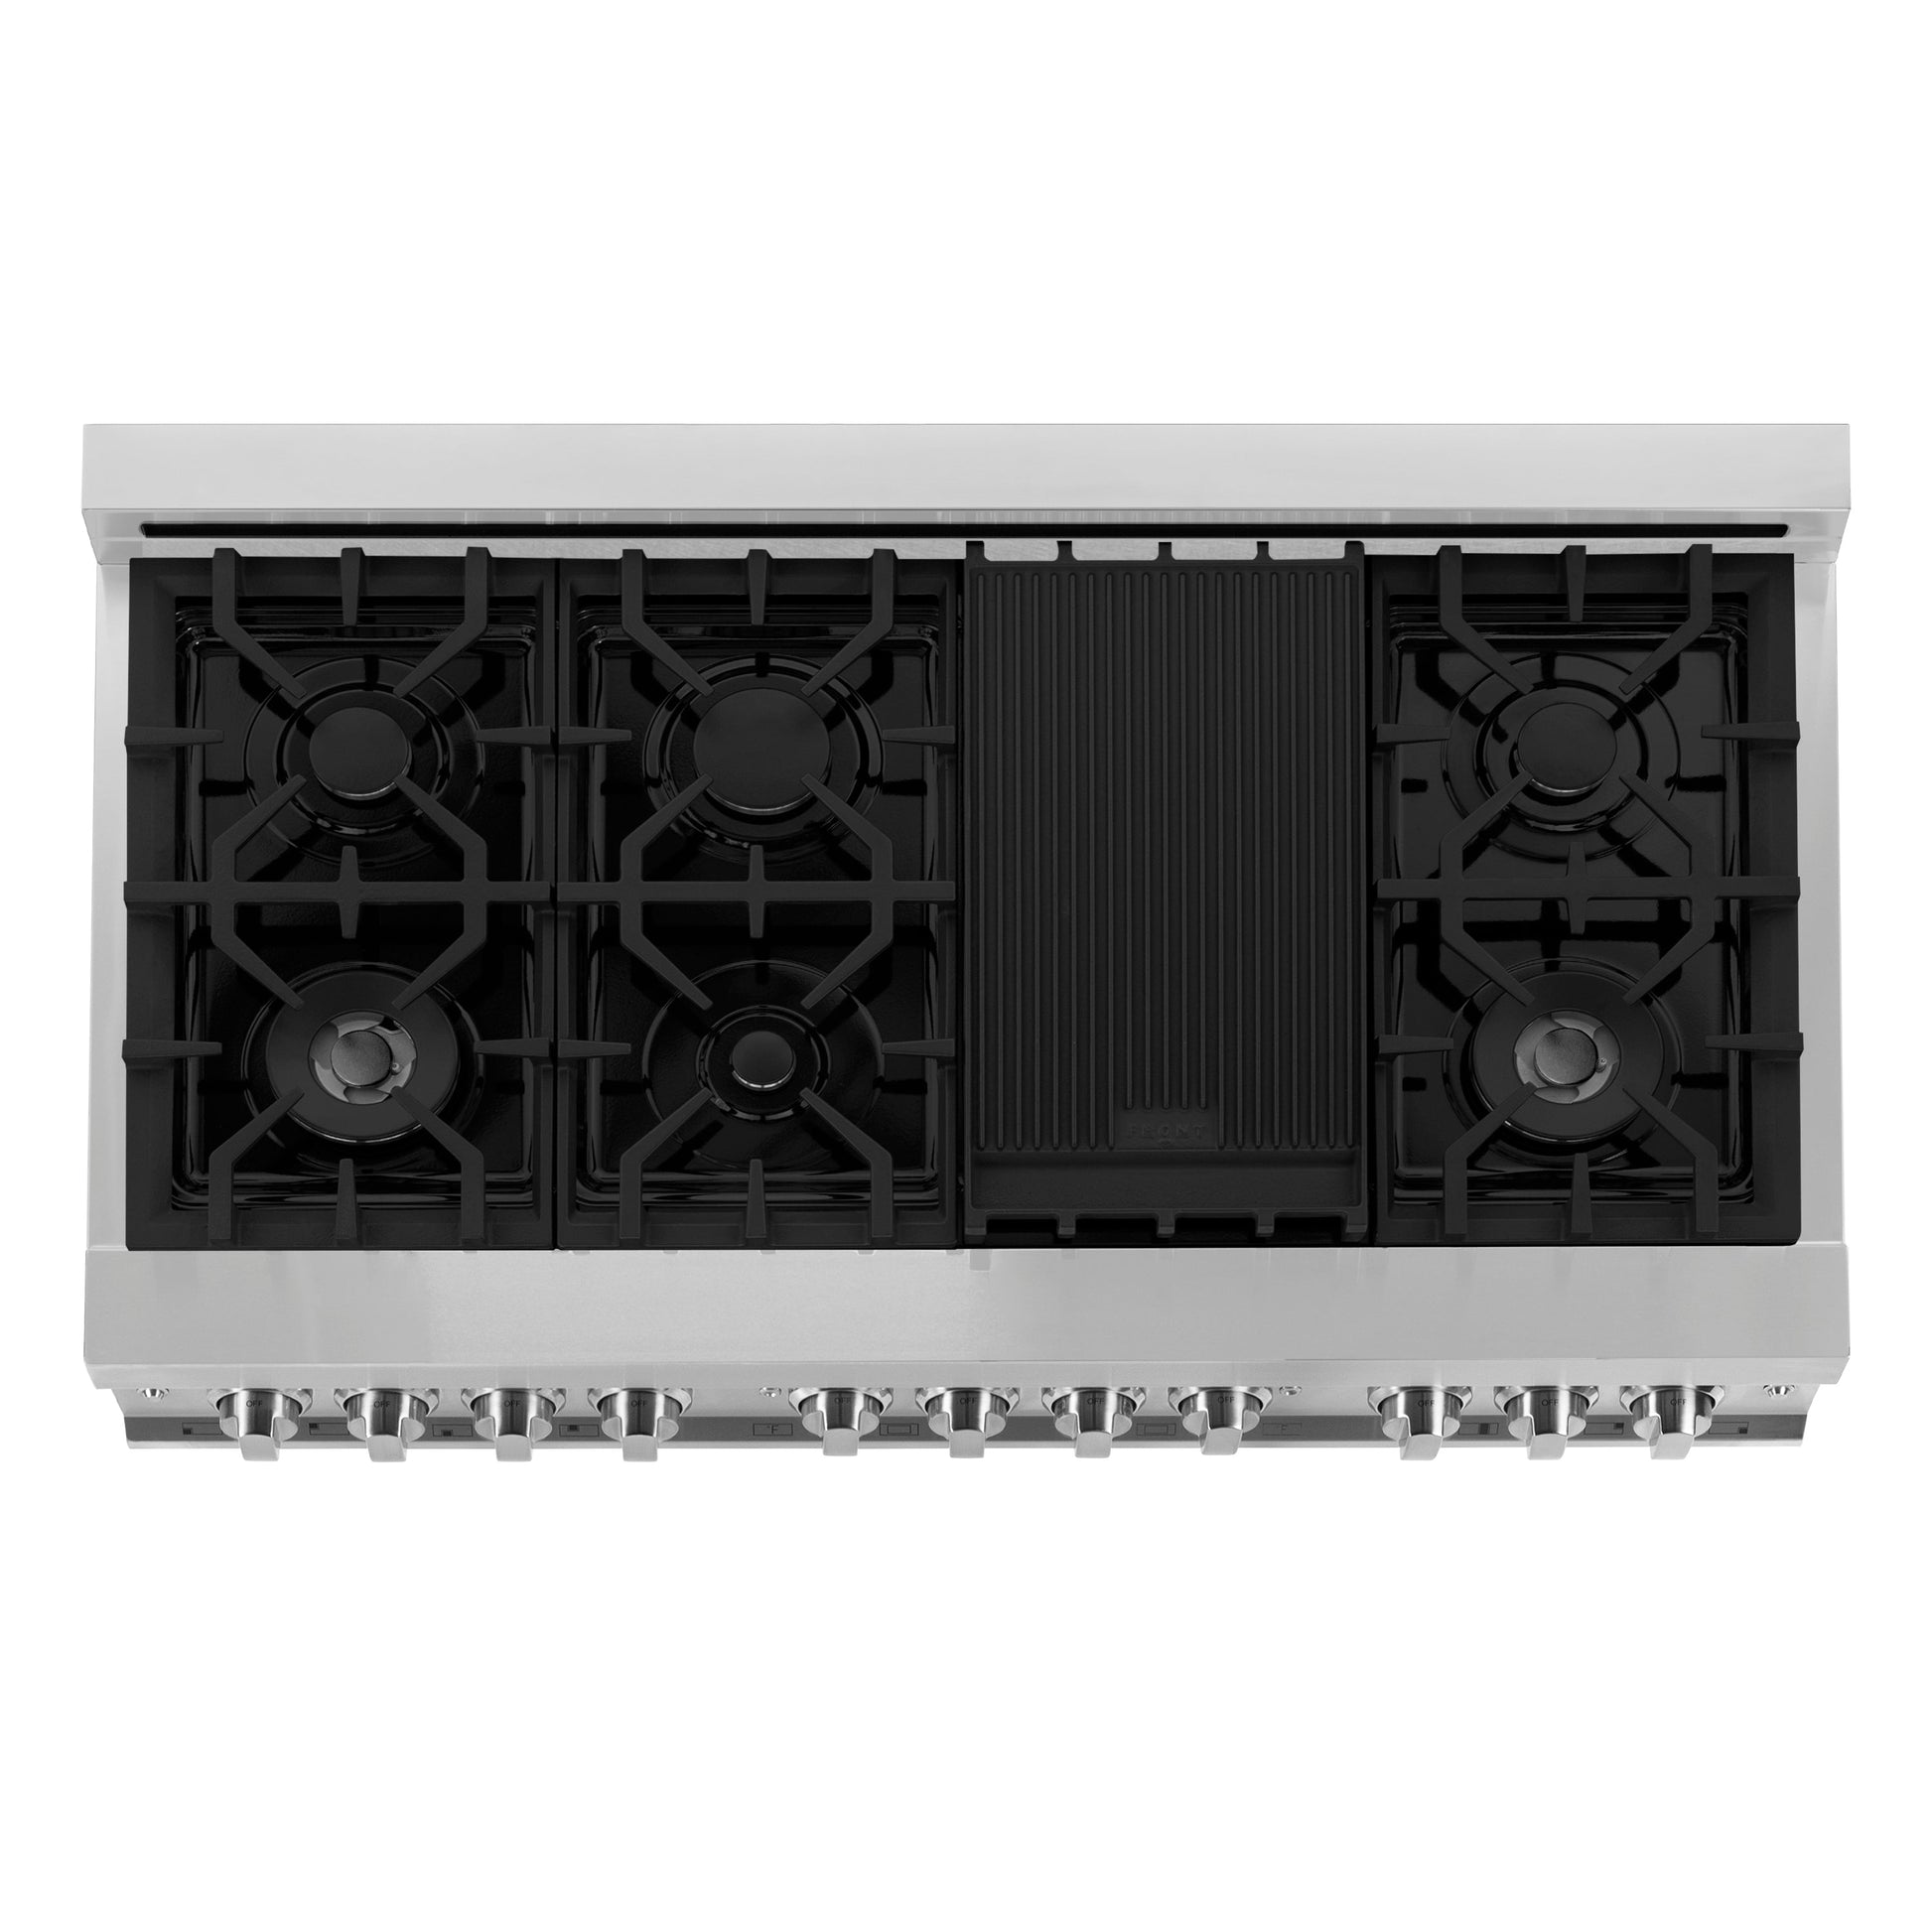 ZLINE 48" Kitchen Package with Dual Fuel Range, Range Hood, Microwave Drawer, and Tall Tub Dishwasher - Stainless Steel